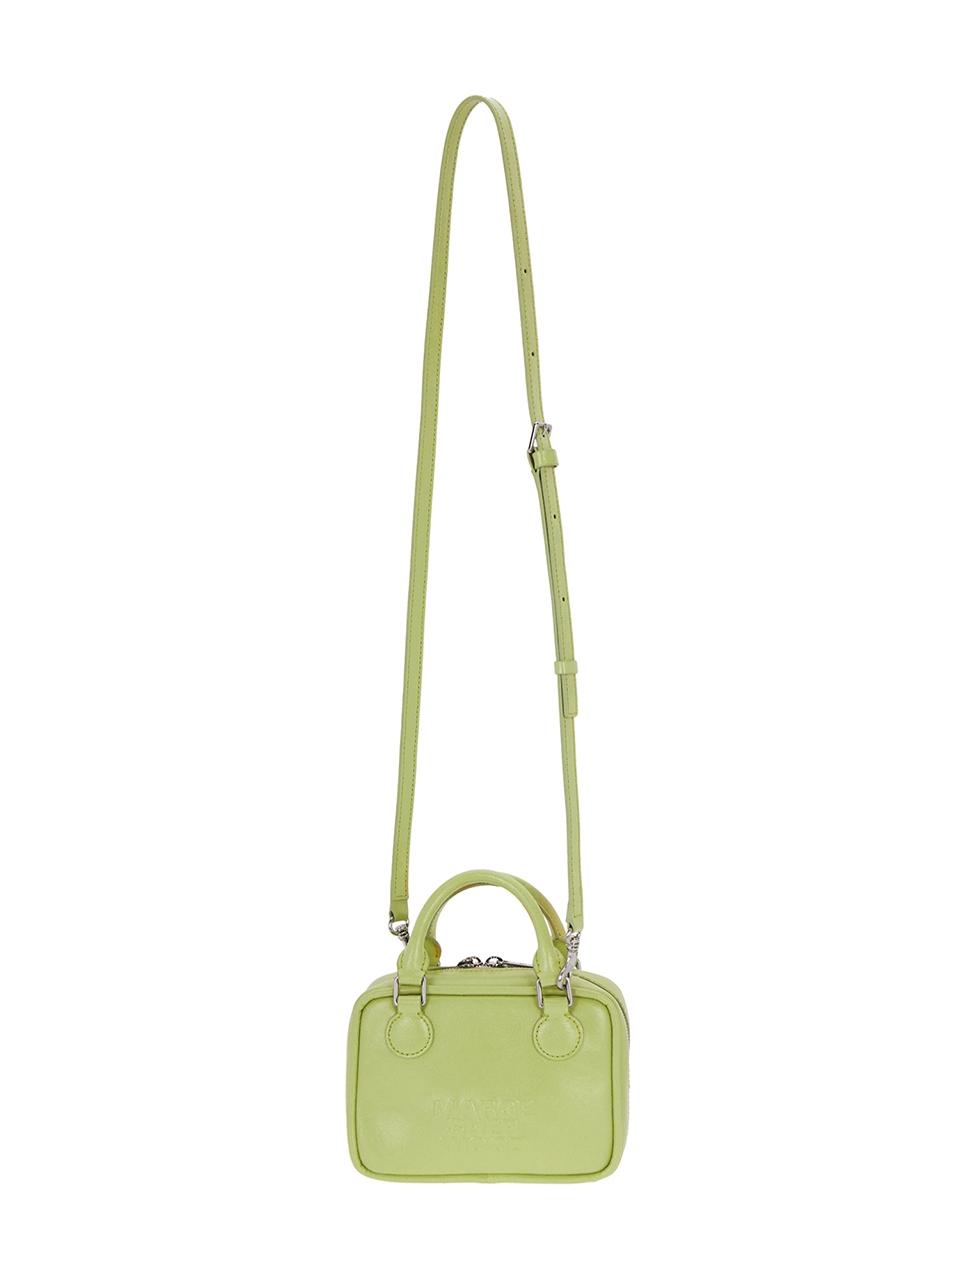 Marge Sherwood Crinkled Leather Square Shoulder Bag with Piping - Green